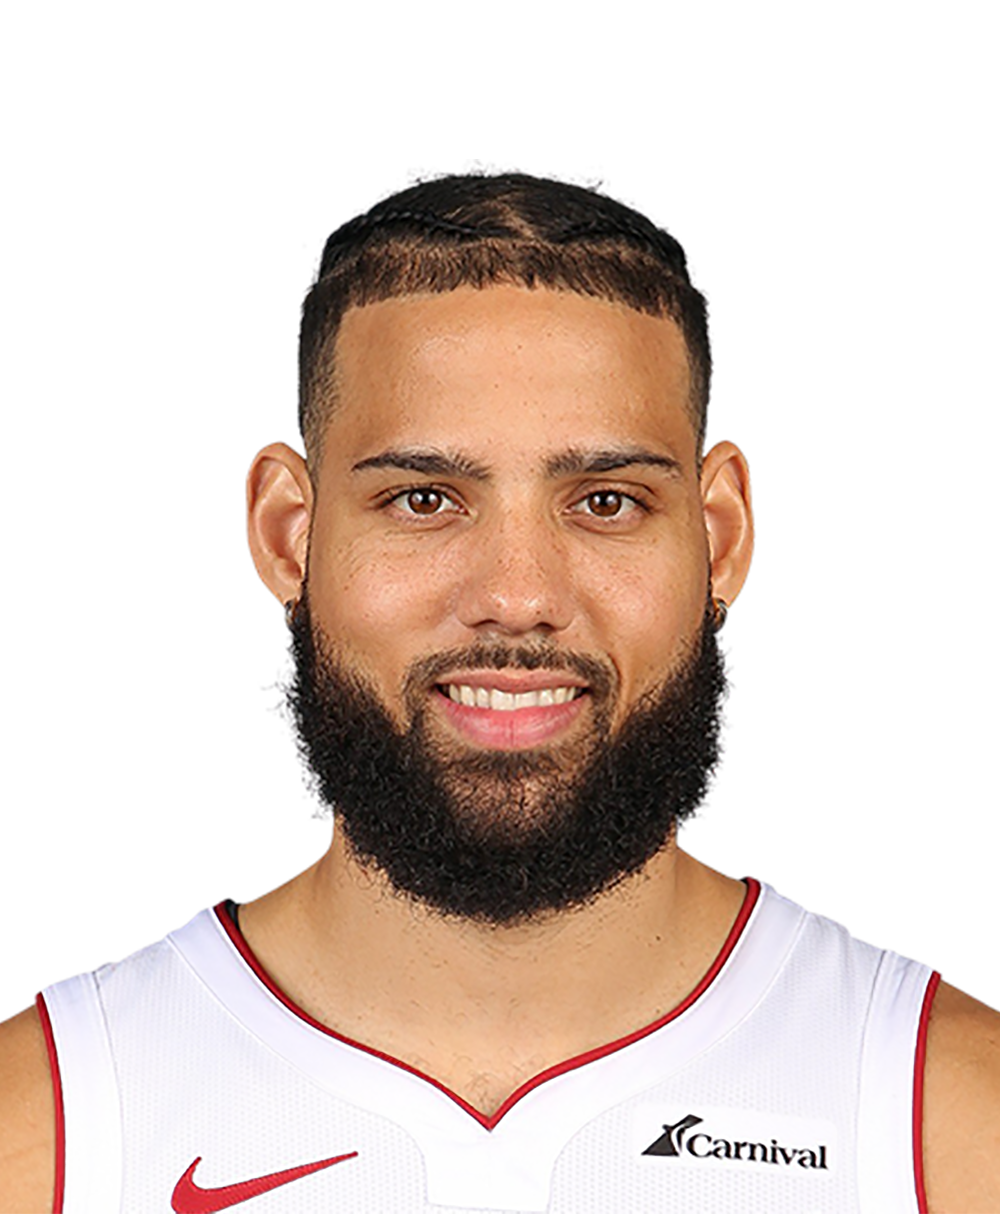 J. Cole Helped Caleb Martin Get On Miami Heat Roster